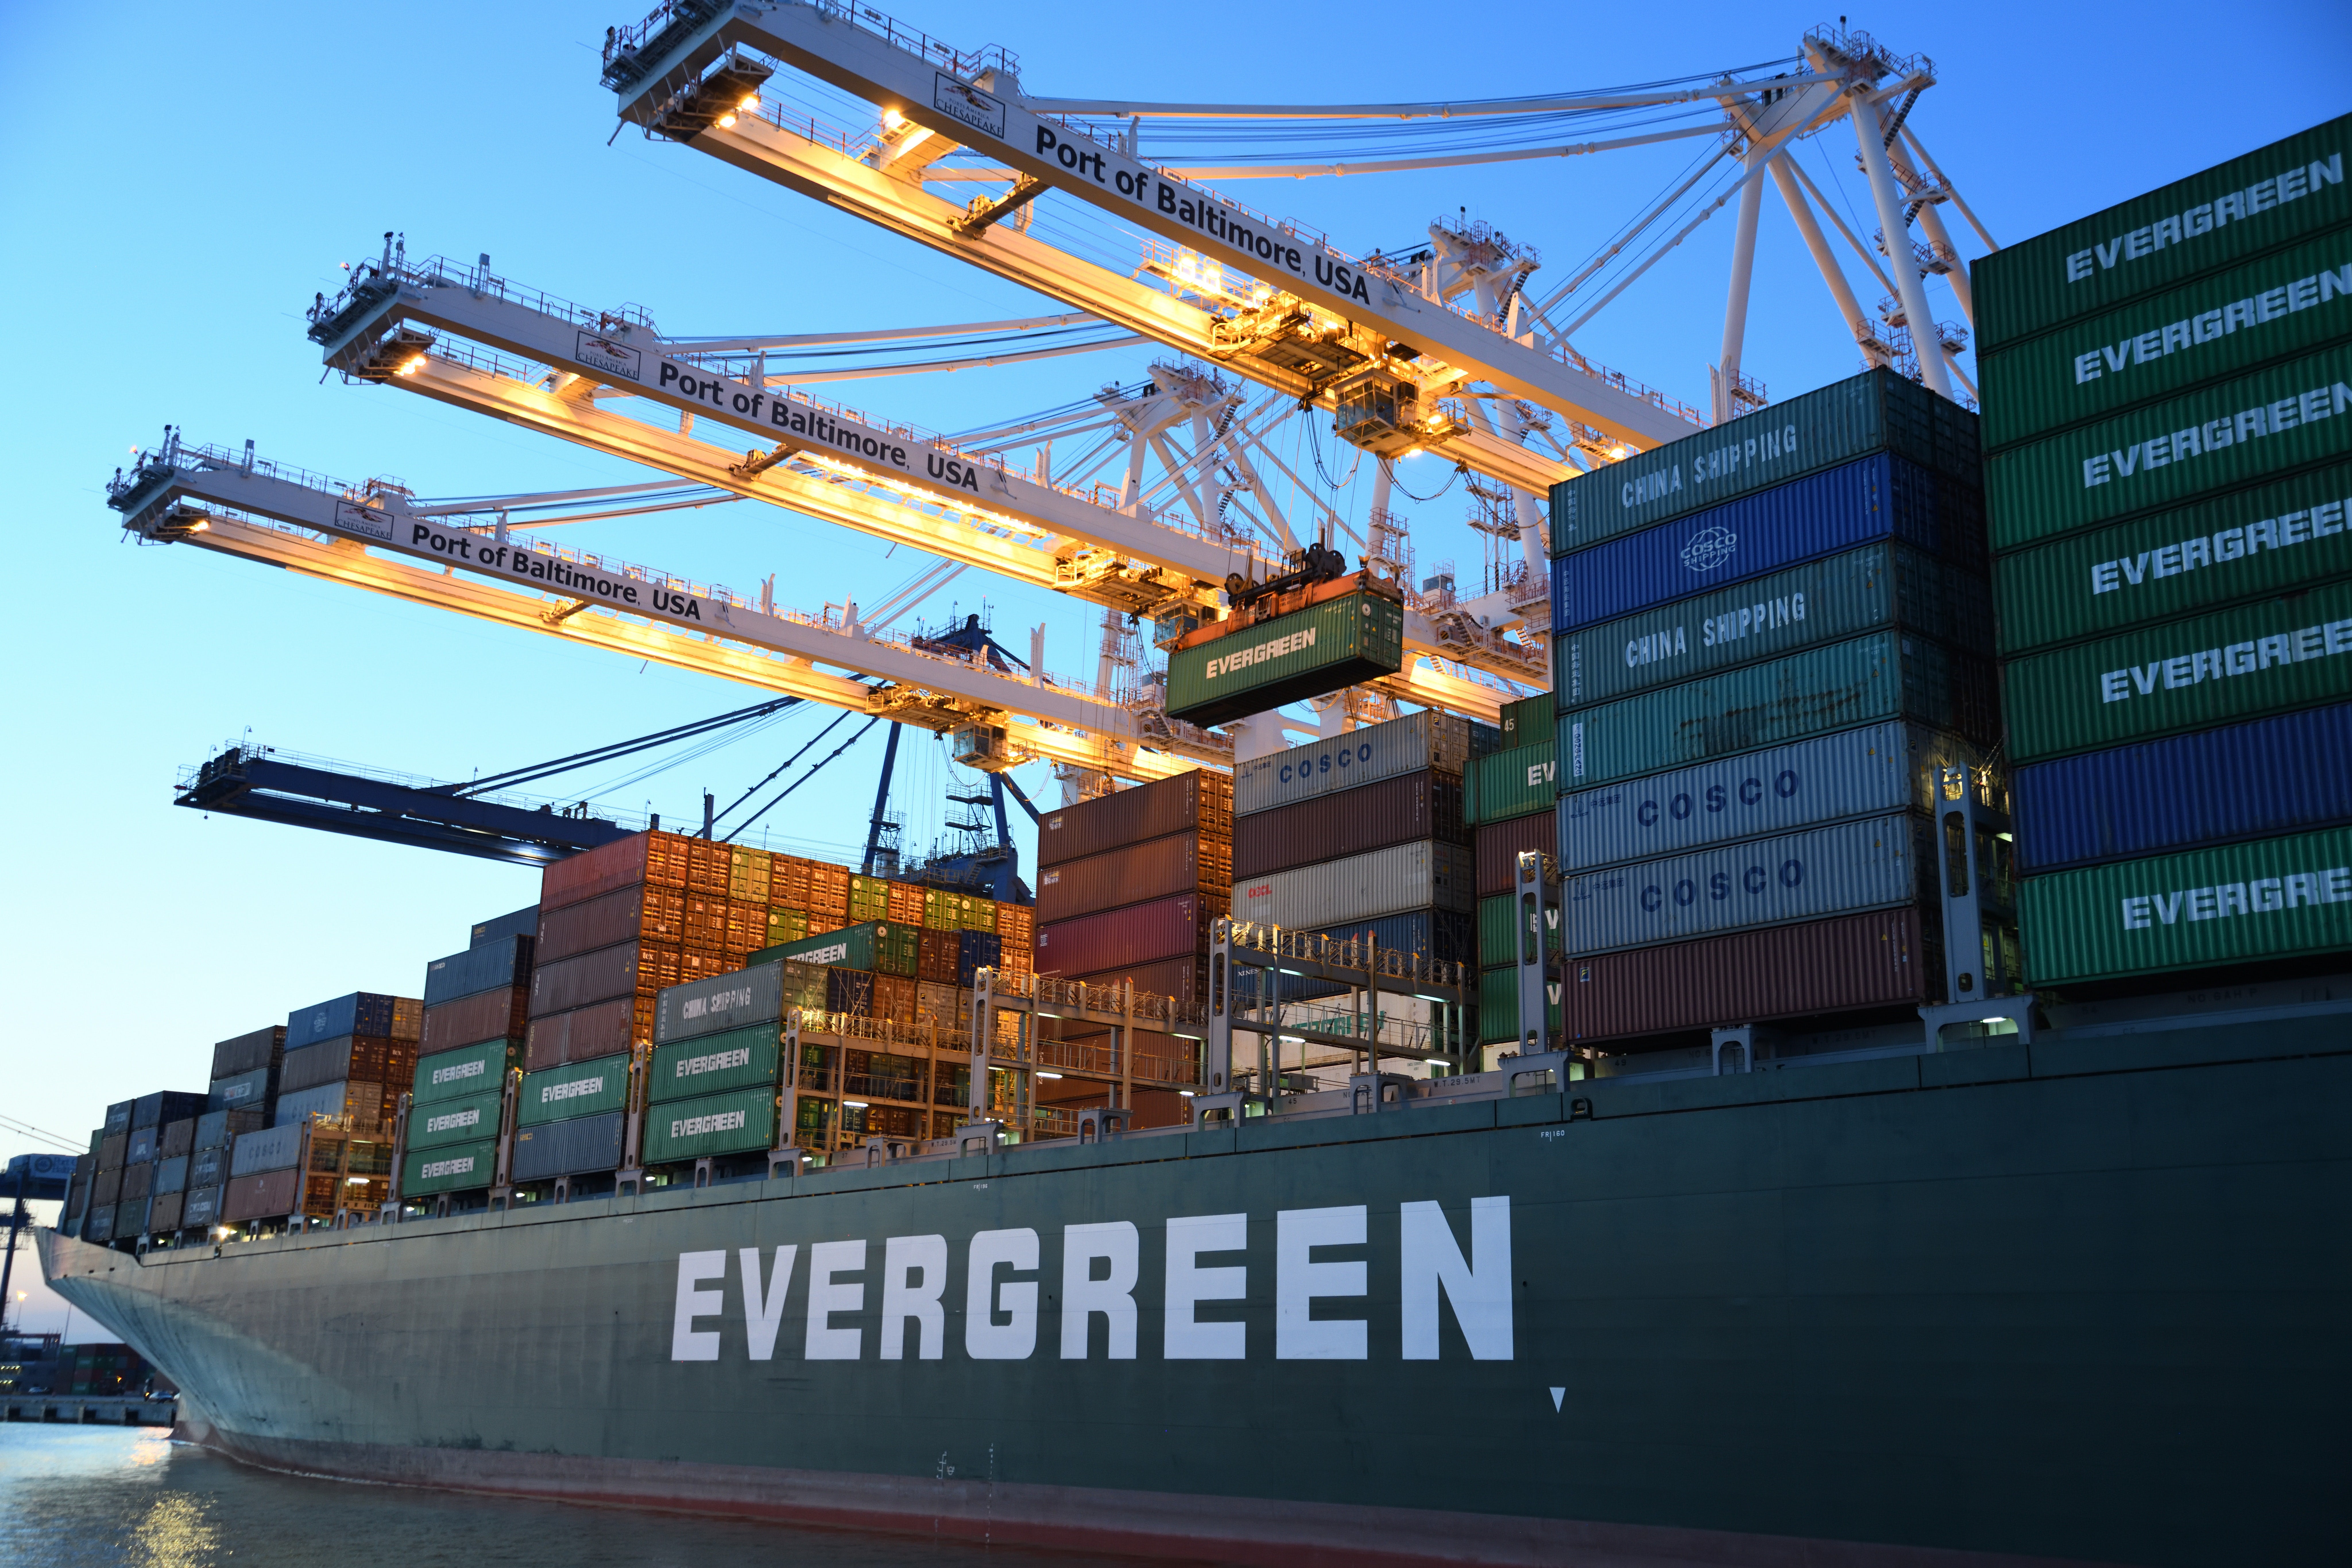 A picture showing an Evergreen Marine ship with containers and cranes in view. Much like logistics for international business like those of Evergreen when it got stuck in the Suez Canal, third-party risk management or TPRM is essential to ensuring supply chain vendors are trusted partners providing trusted components.